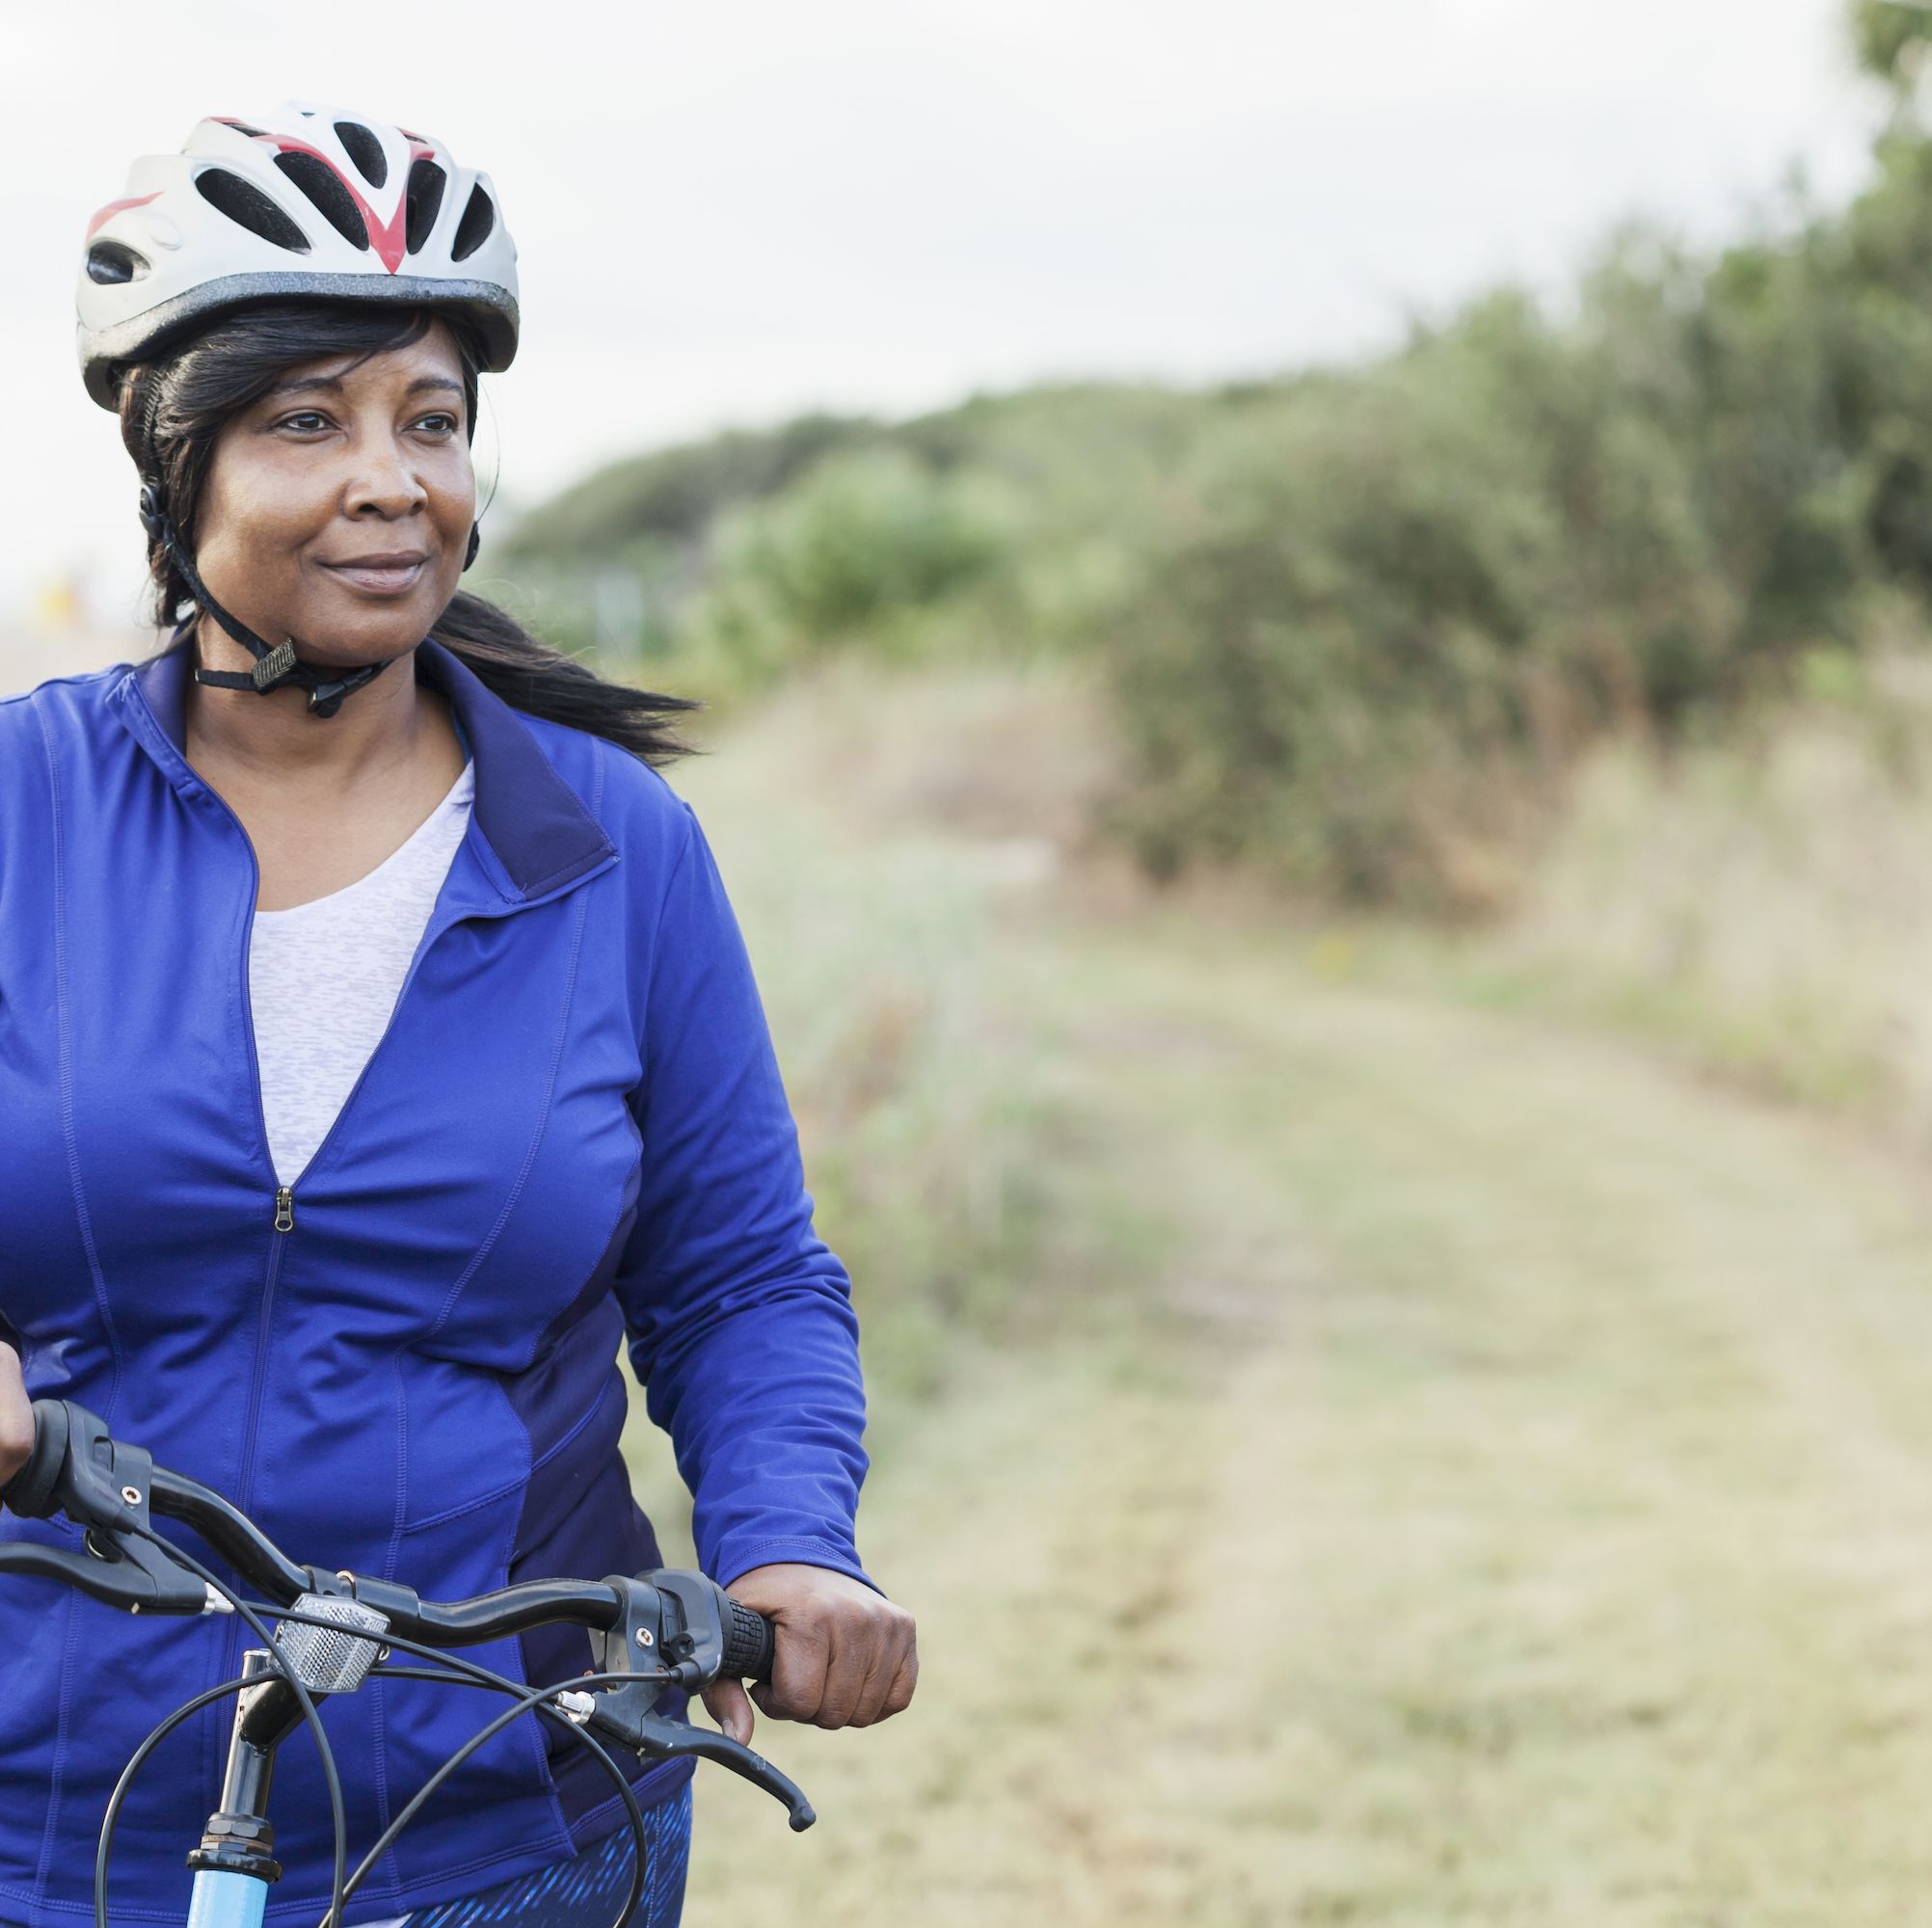 Cycling for Weight Loss: 6 Tips Straight from the Experts